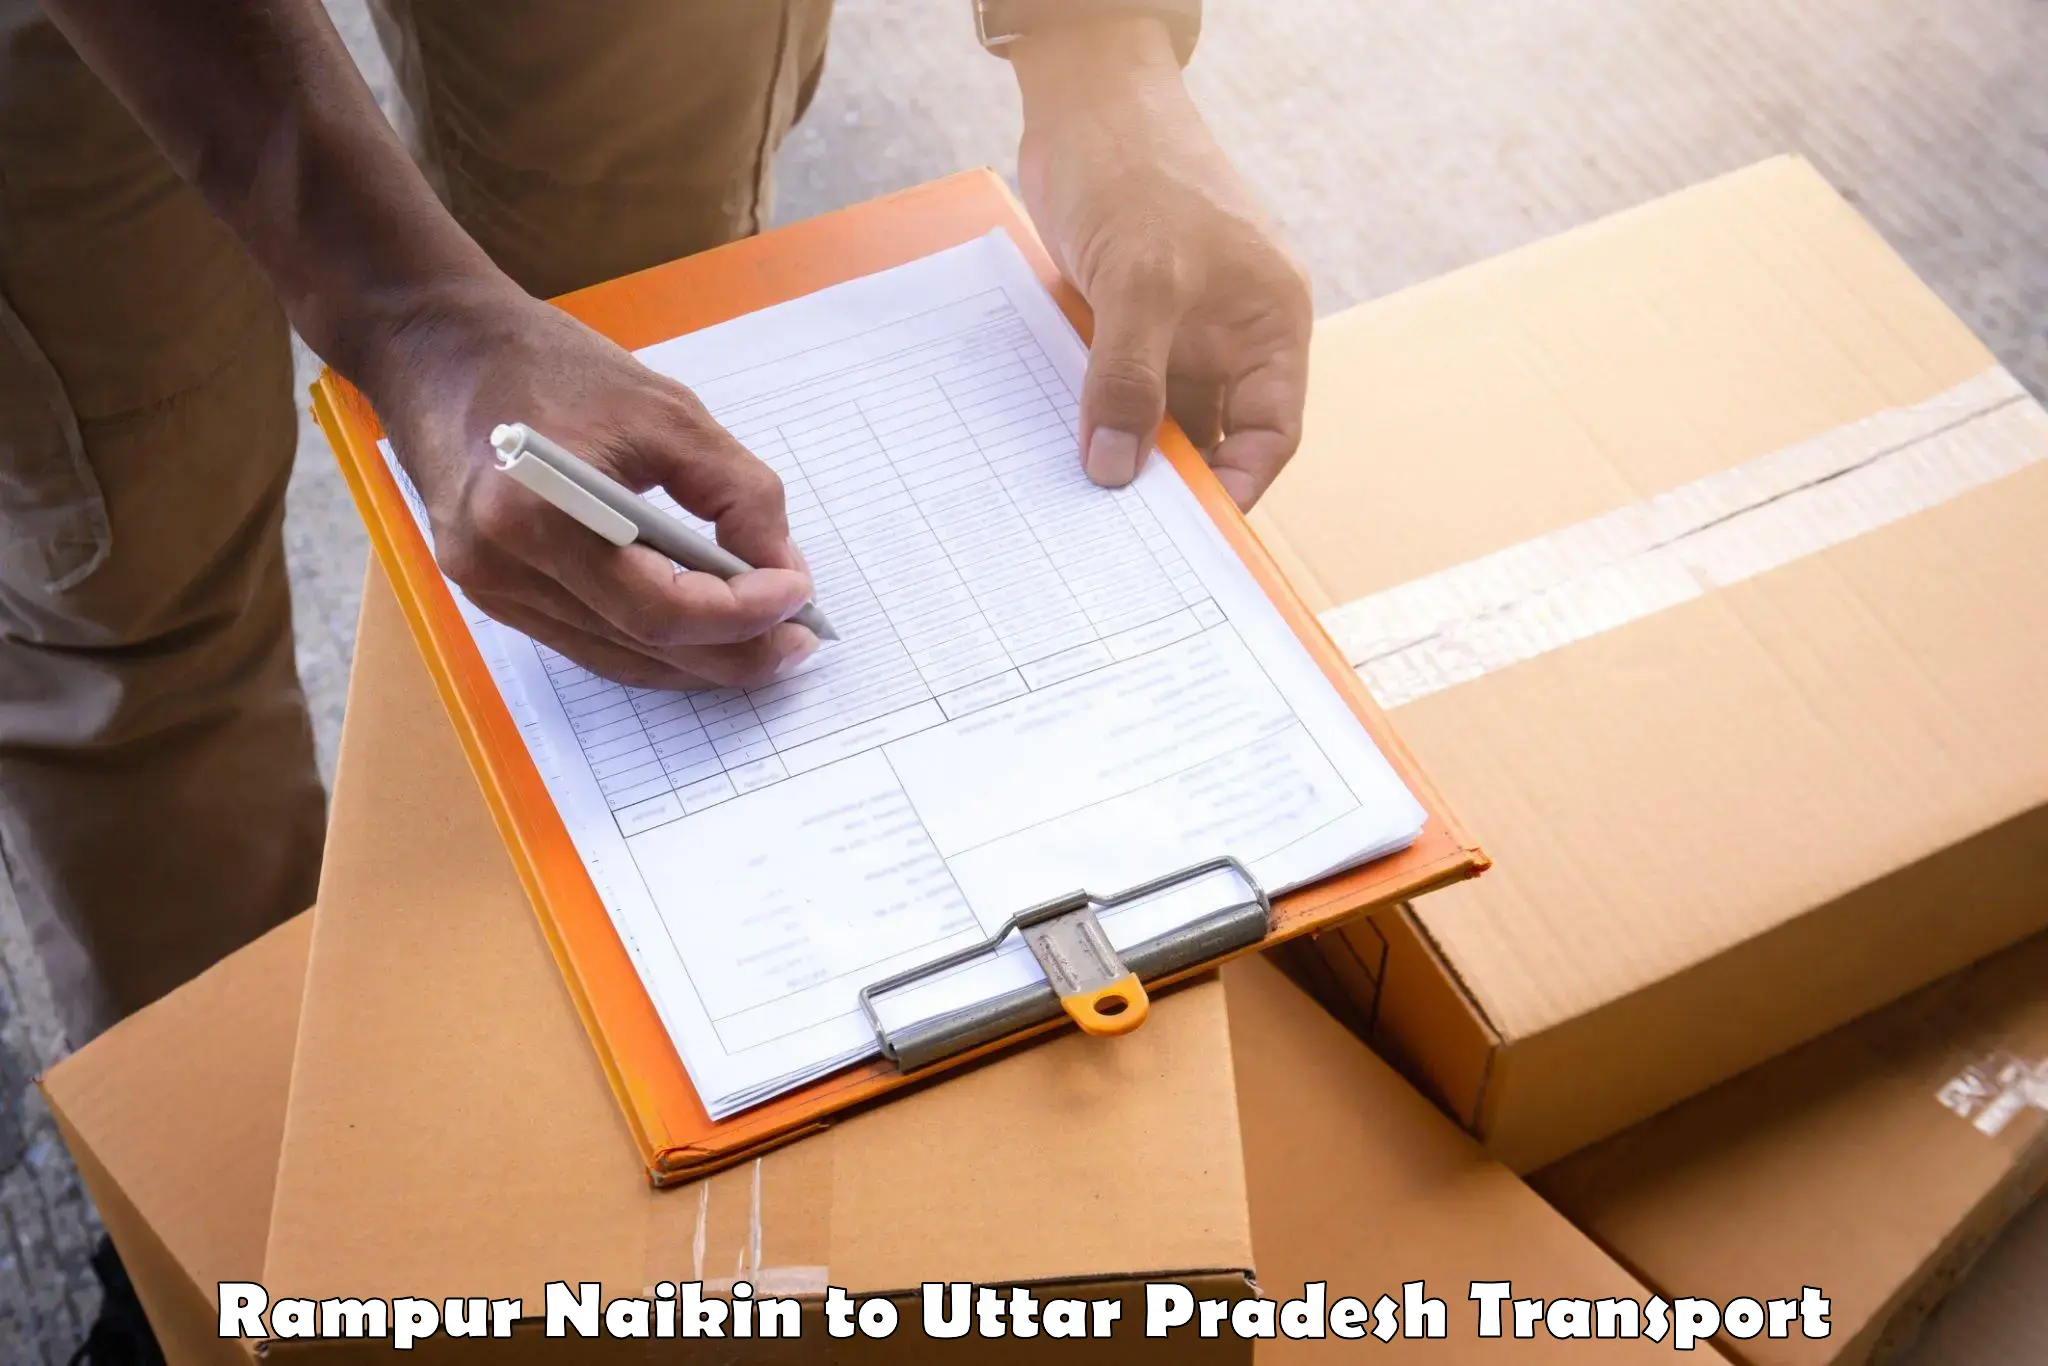 Nationwide transport services in Rampur Naikin to Itava